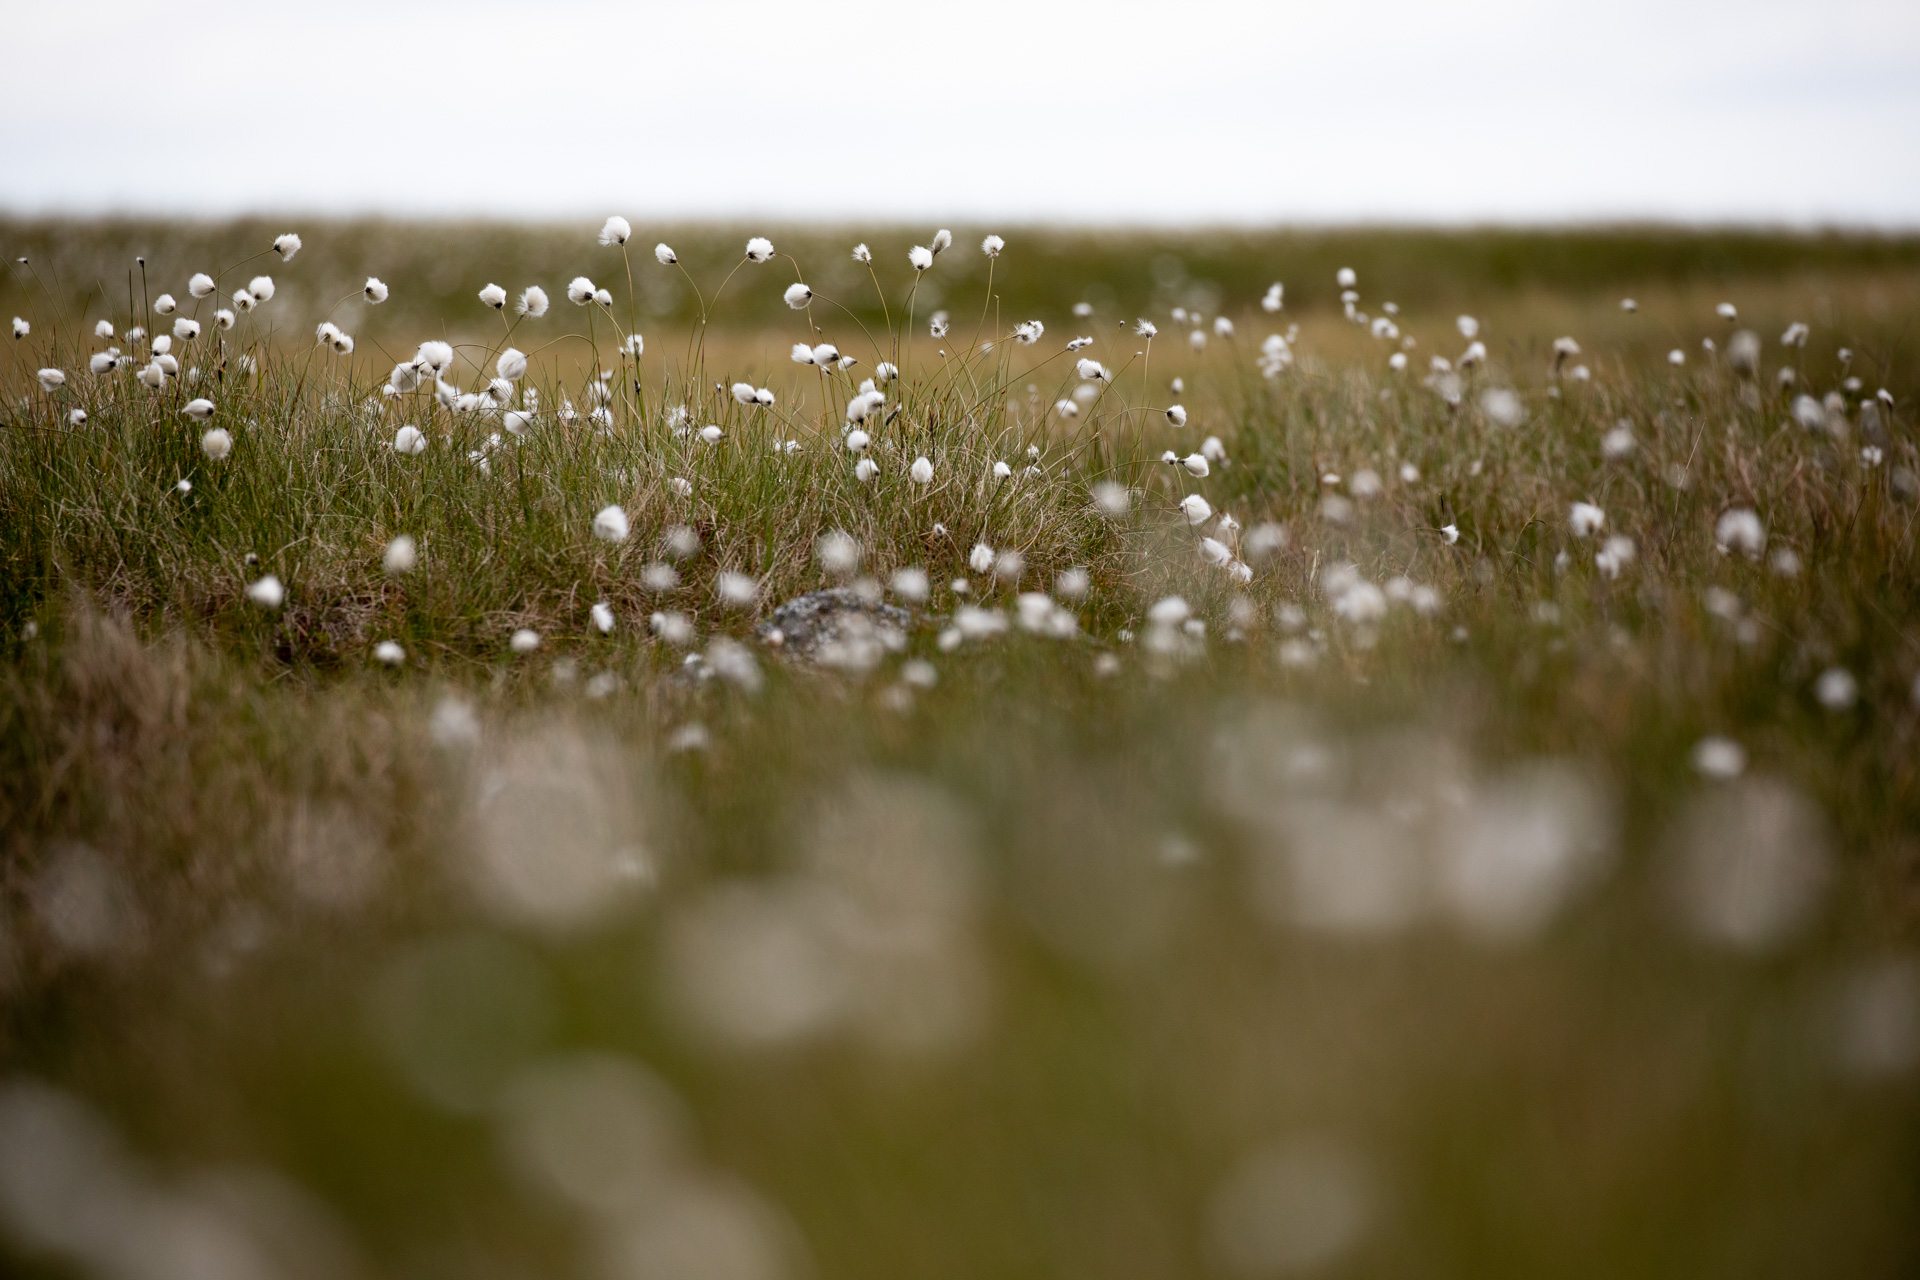 Cottongrass grows in a field